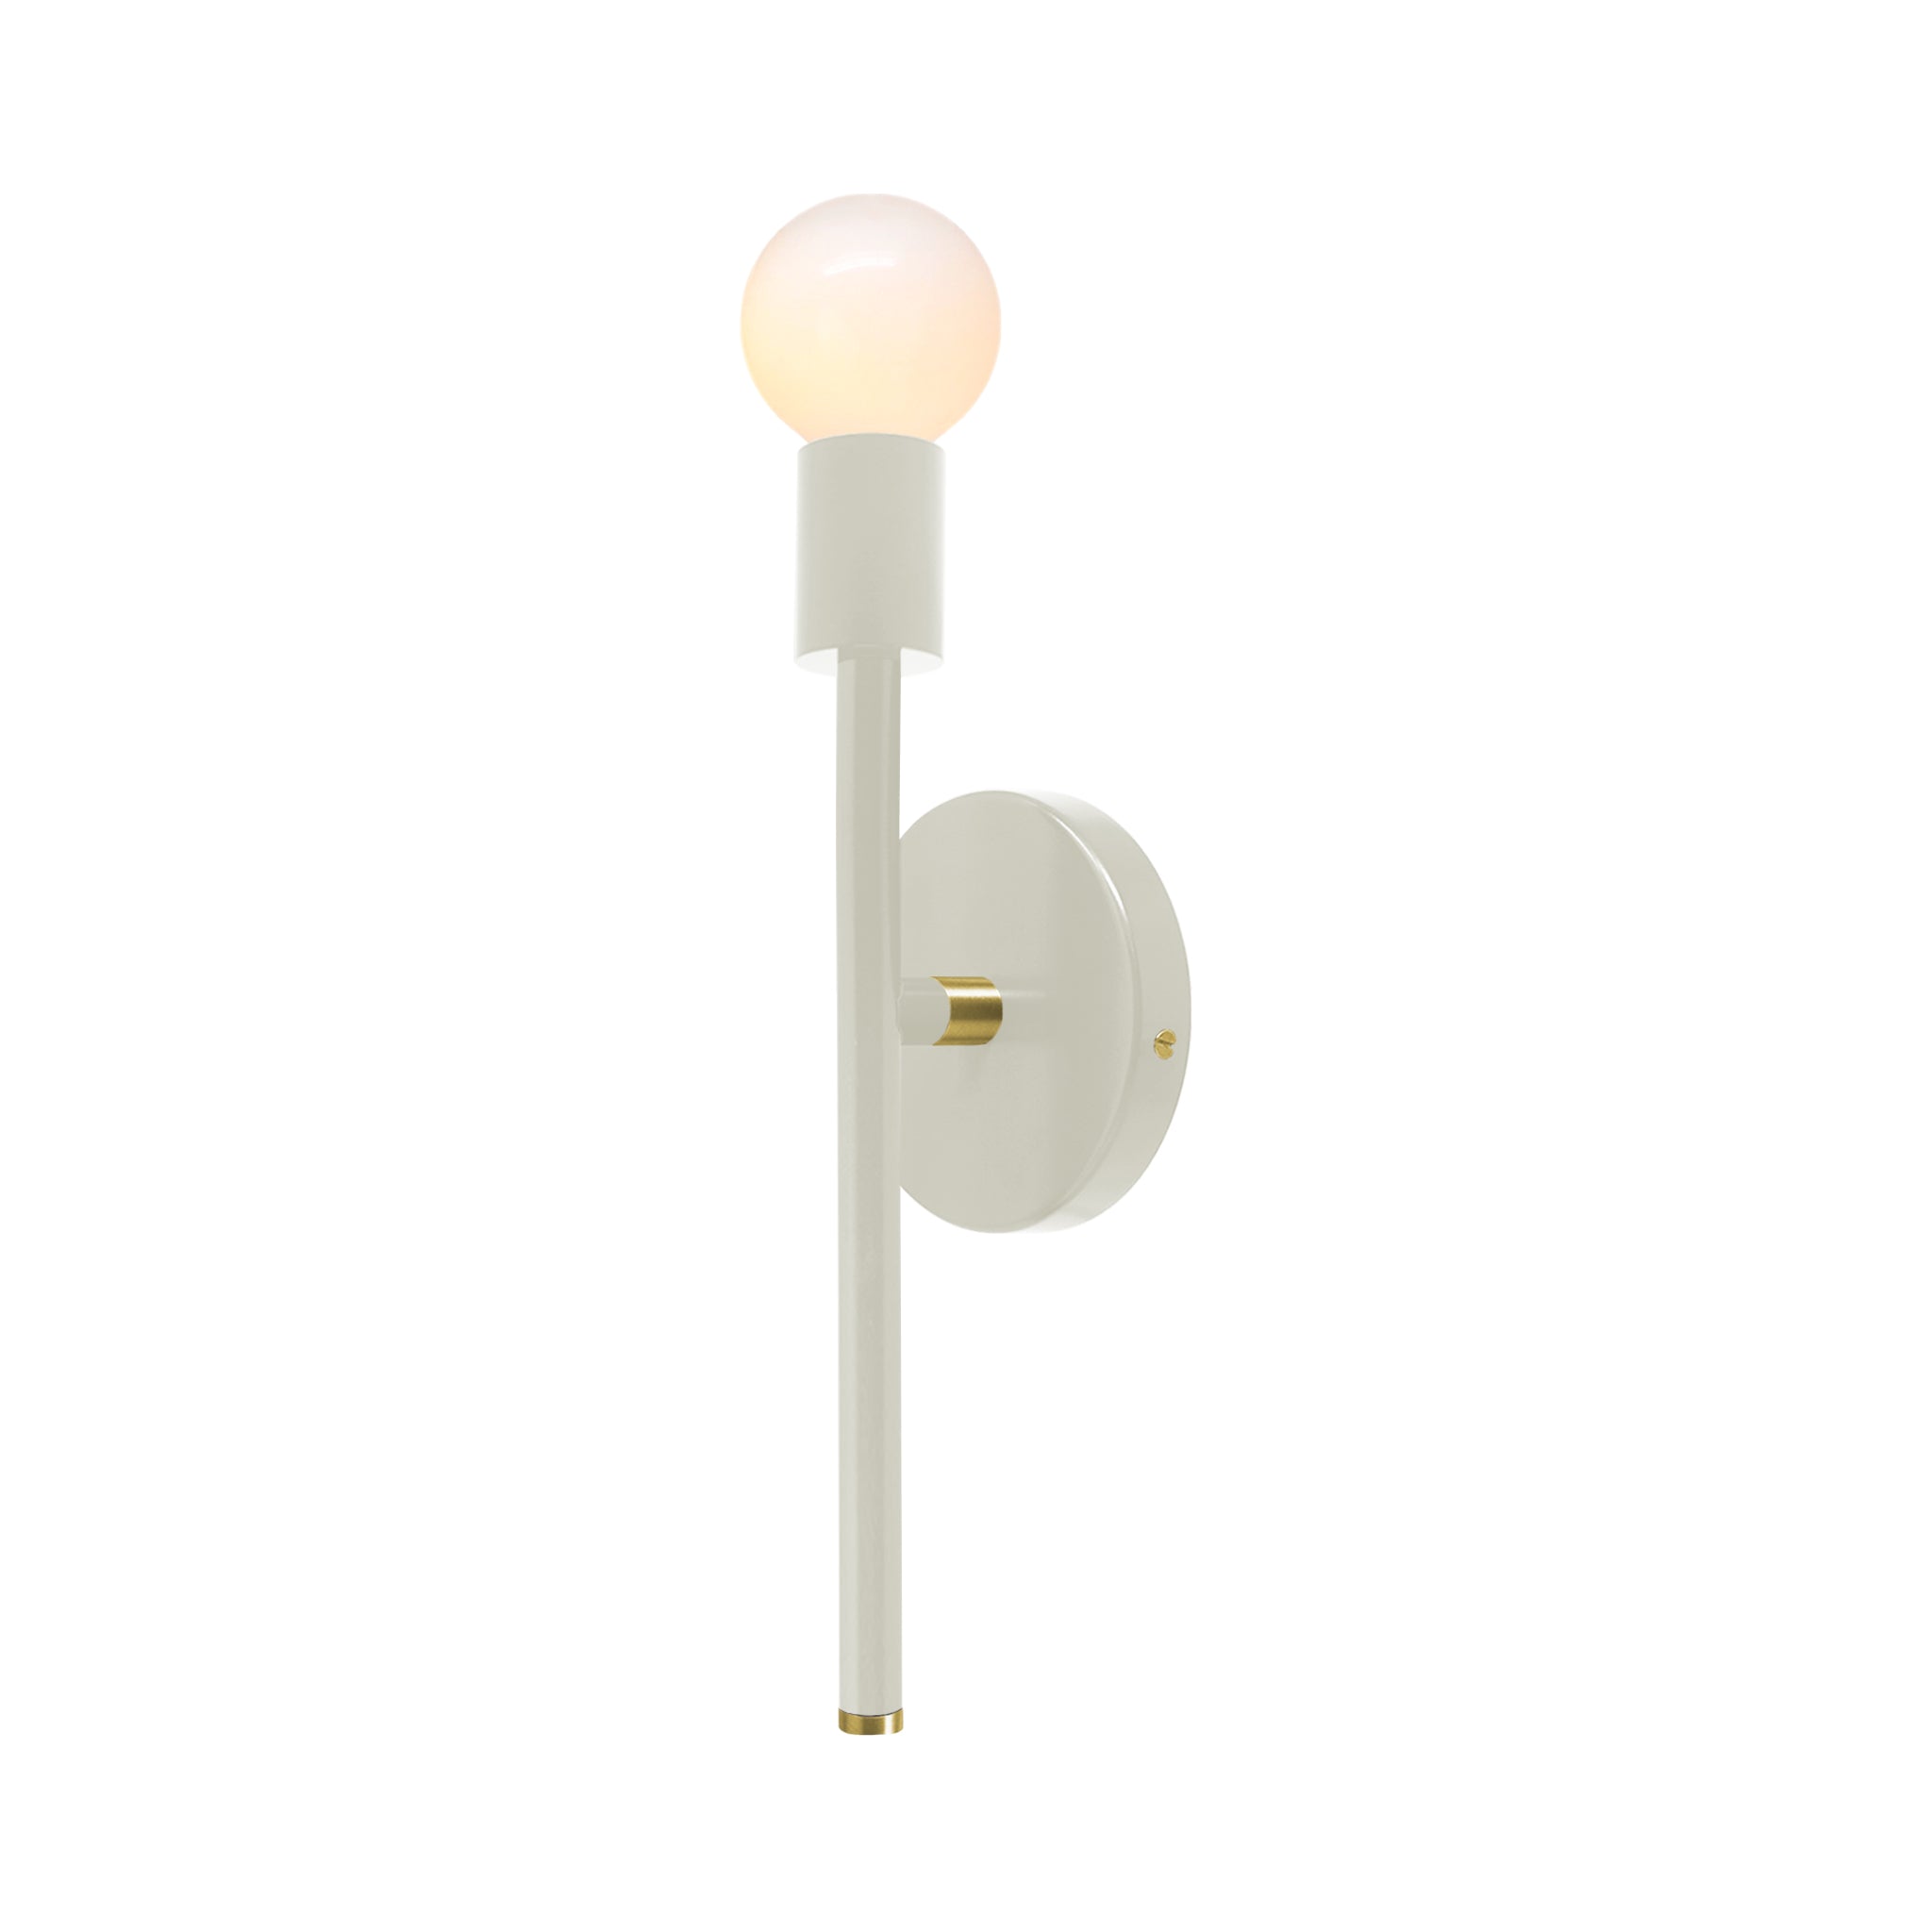 Brass and bone color Major sconce 15" Dutton Brown lighting